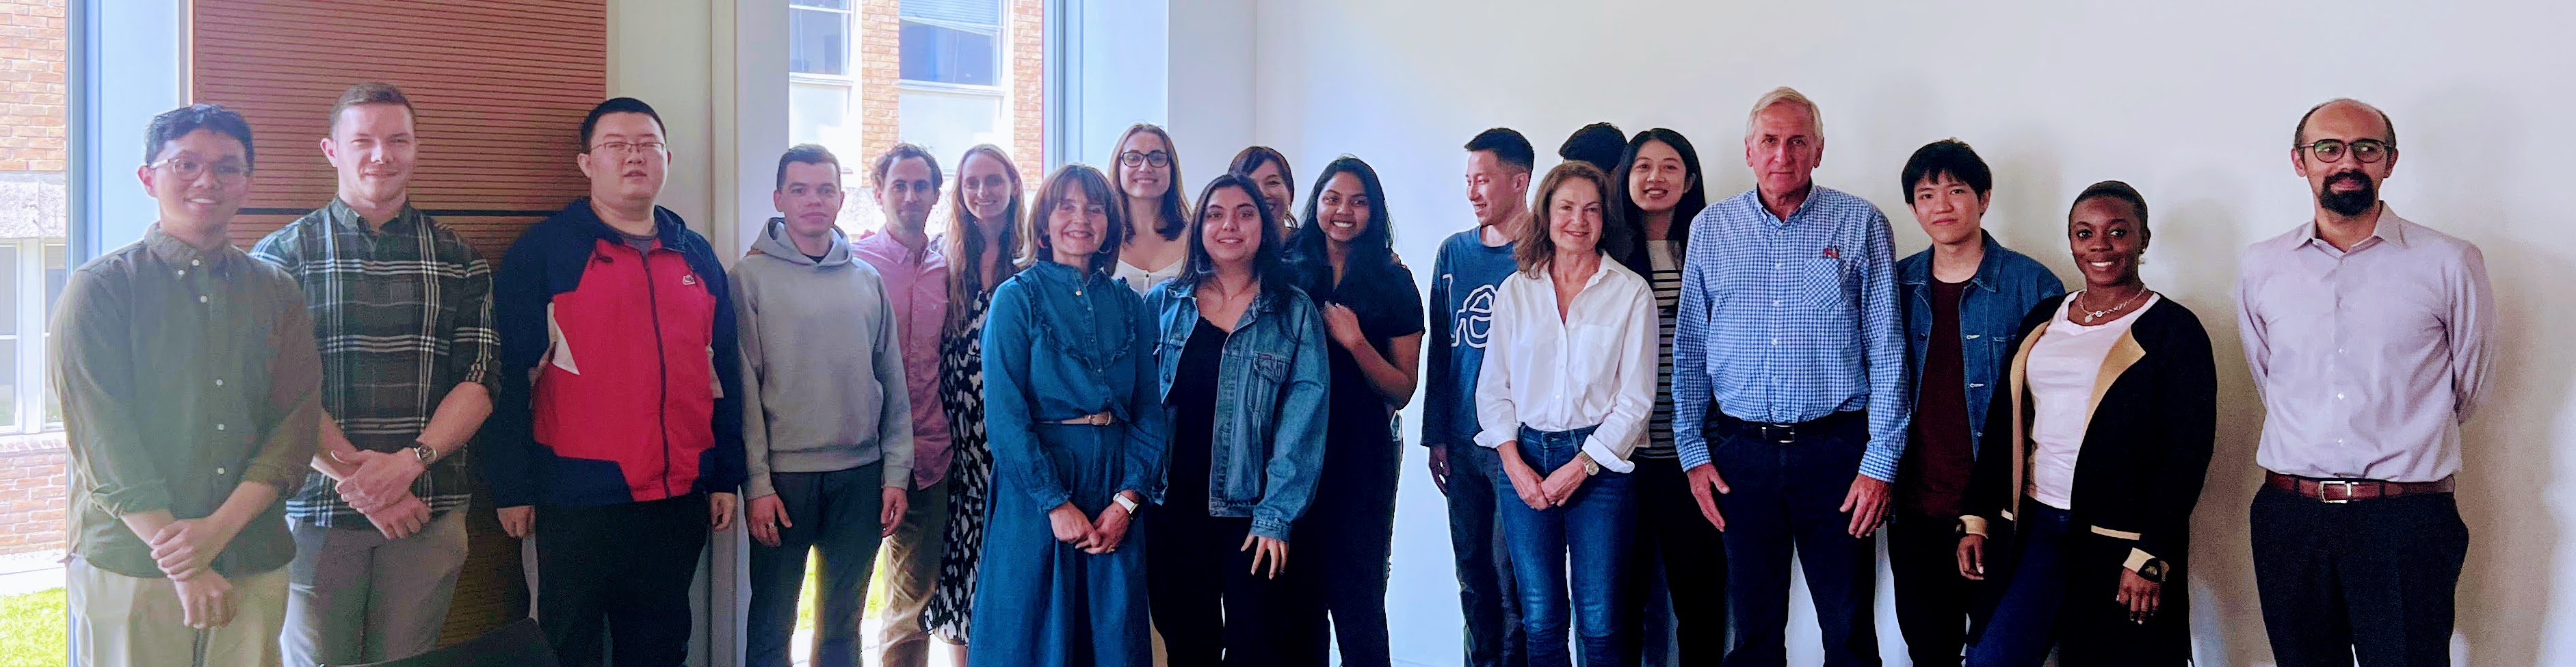 Students from the Lancaster University Management School MSc Digitial Business, Innovation and Management programme stand in a row with members of the Leaders in Residence network.